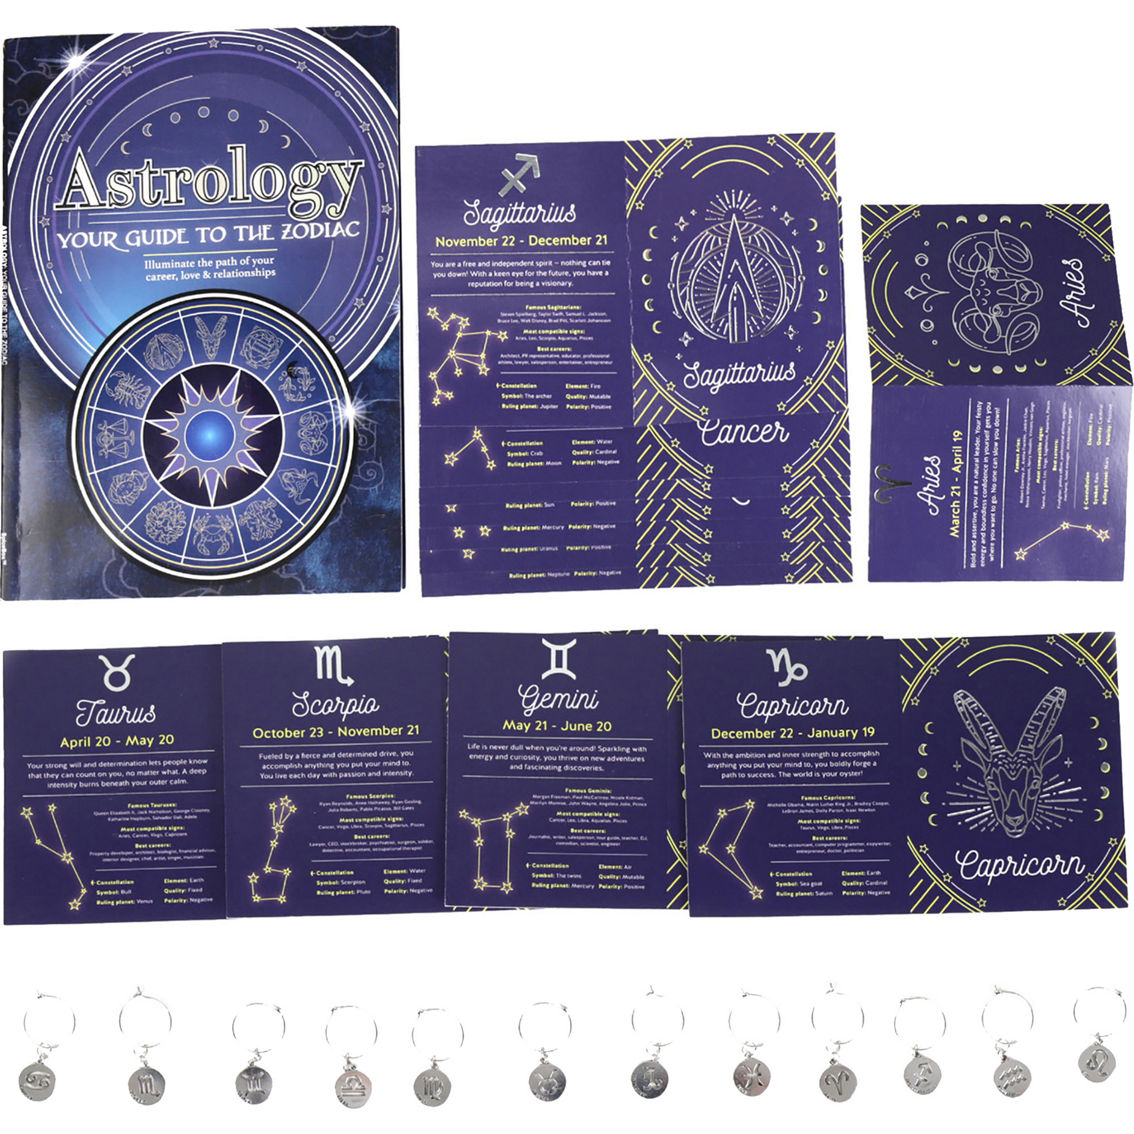 SpiceBox Gift Box: Astrology - Image 4 of 6